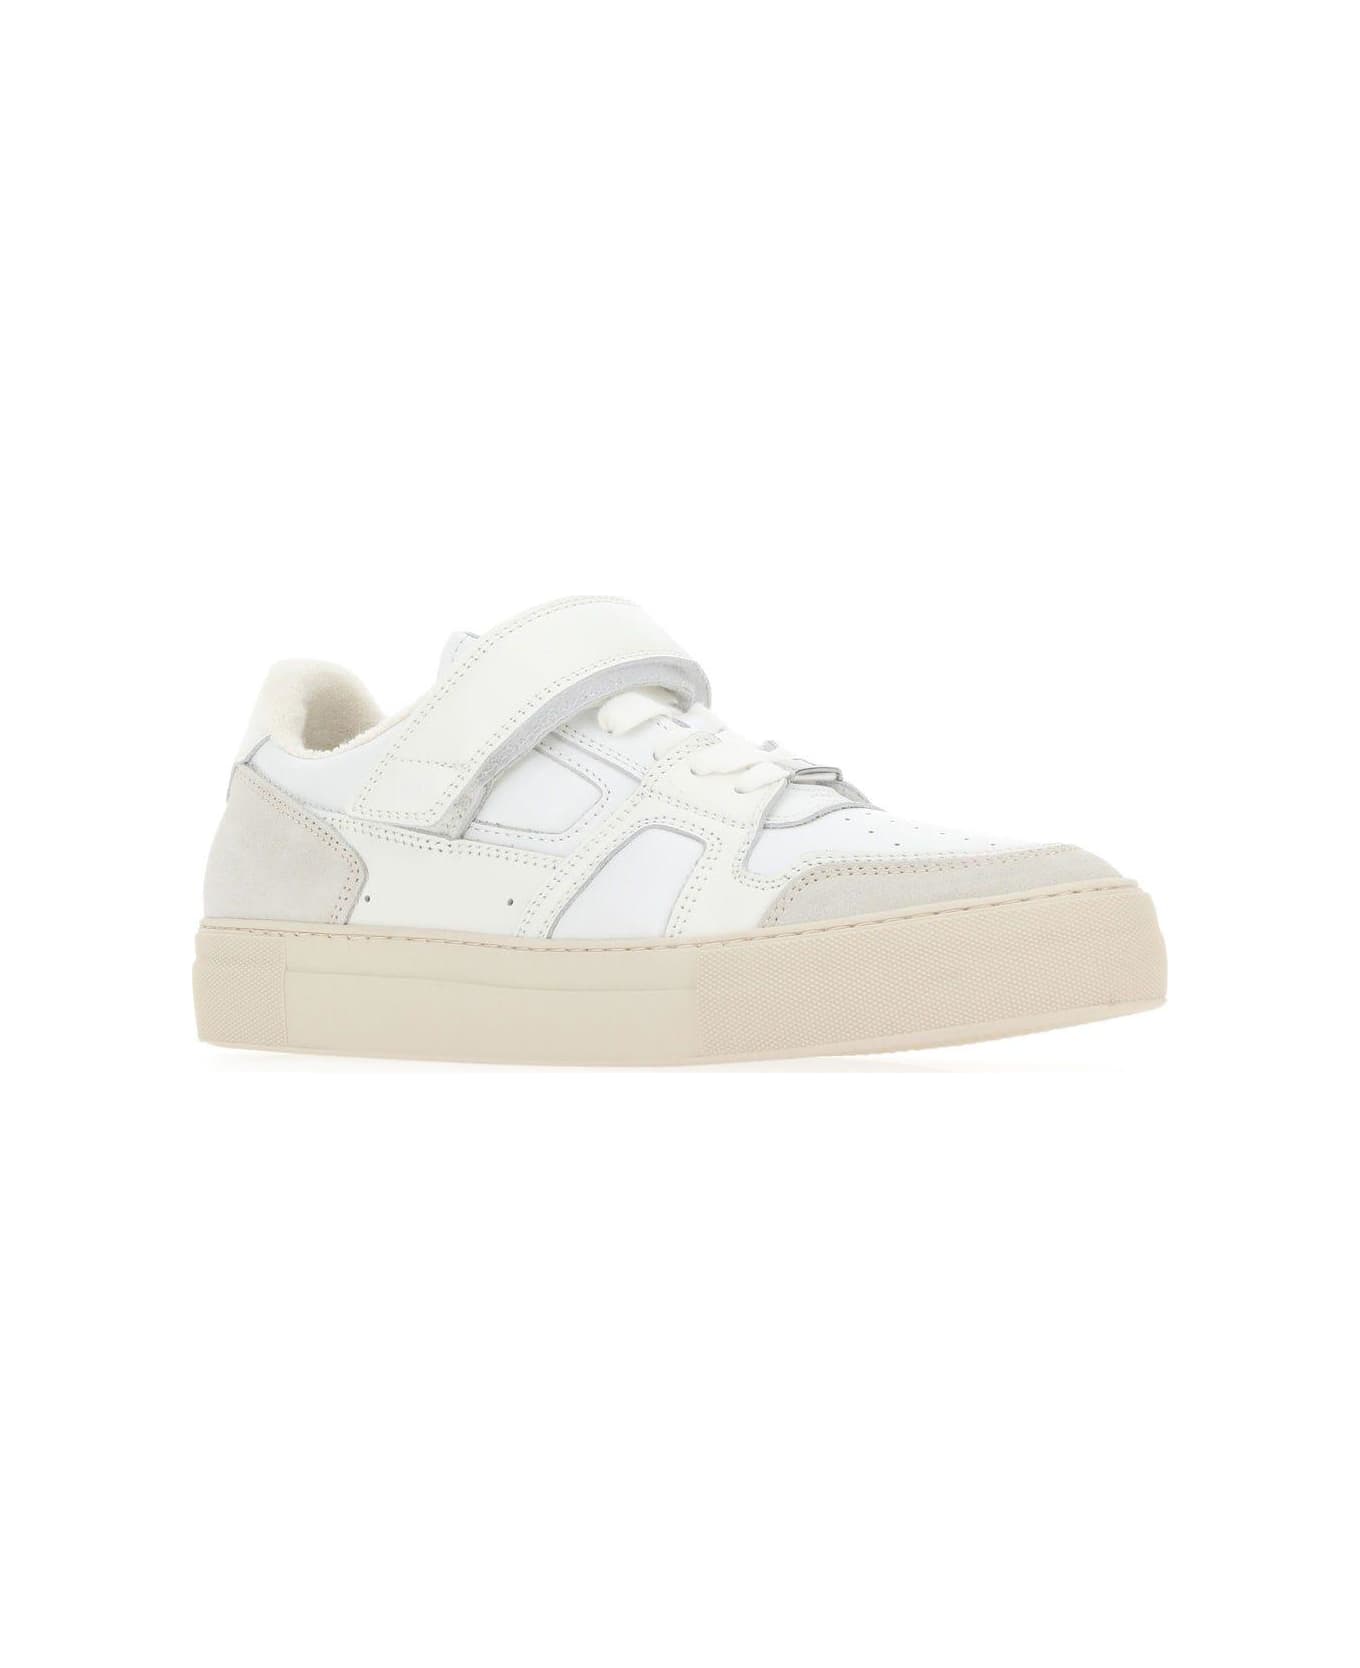 Ami Alexandre Mattiussi Two-tone Leather And Suede Arcade Sneakers - WHITE